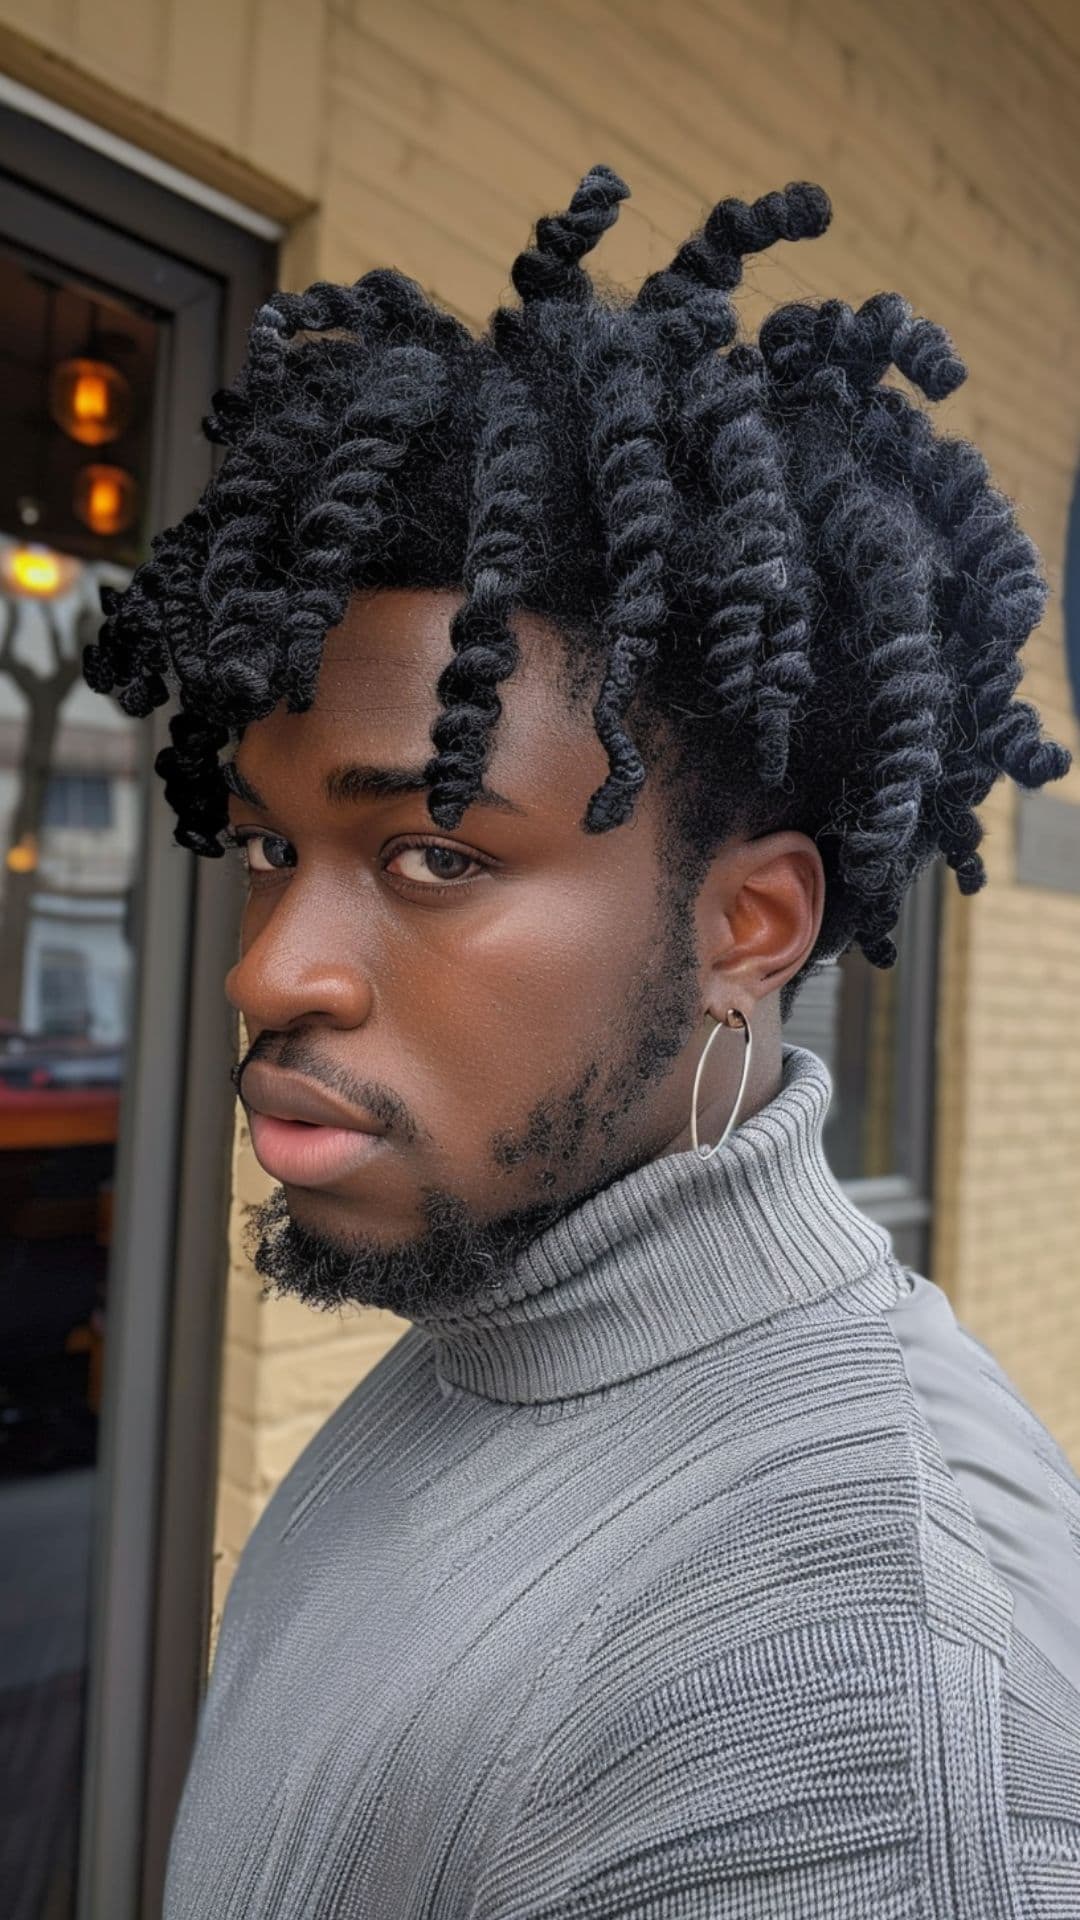 A black man modelling a twist out hairstyle.